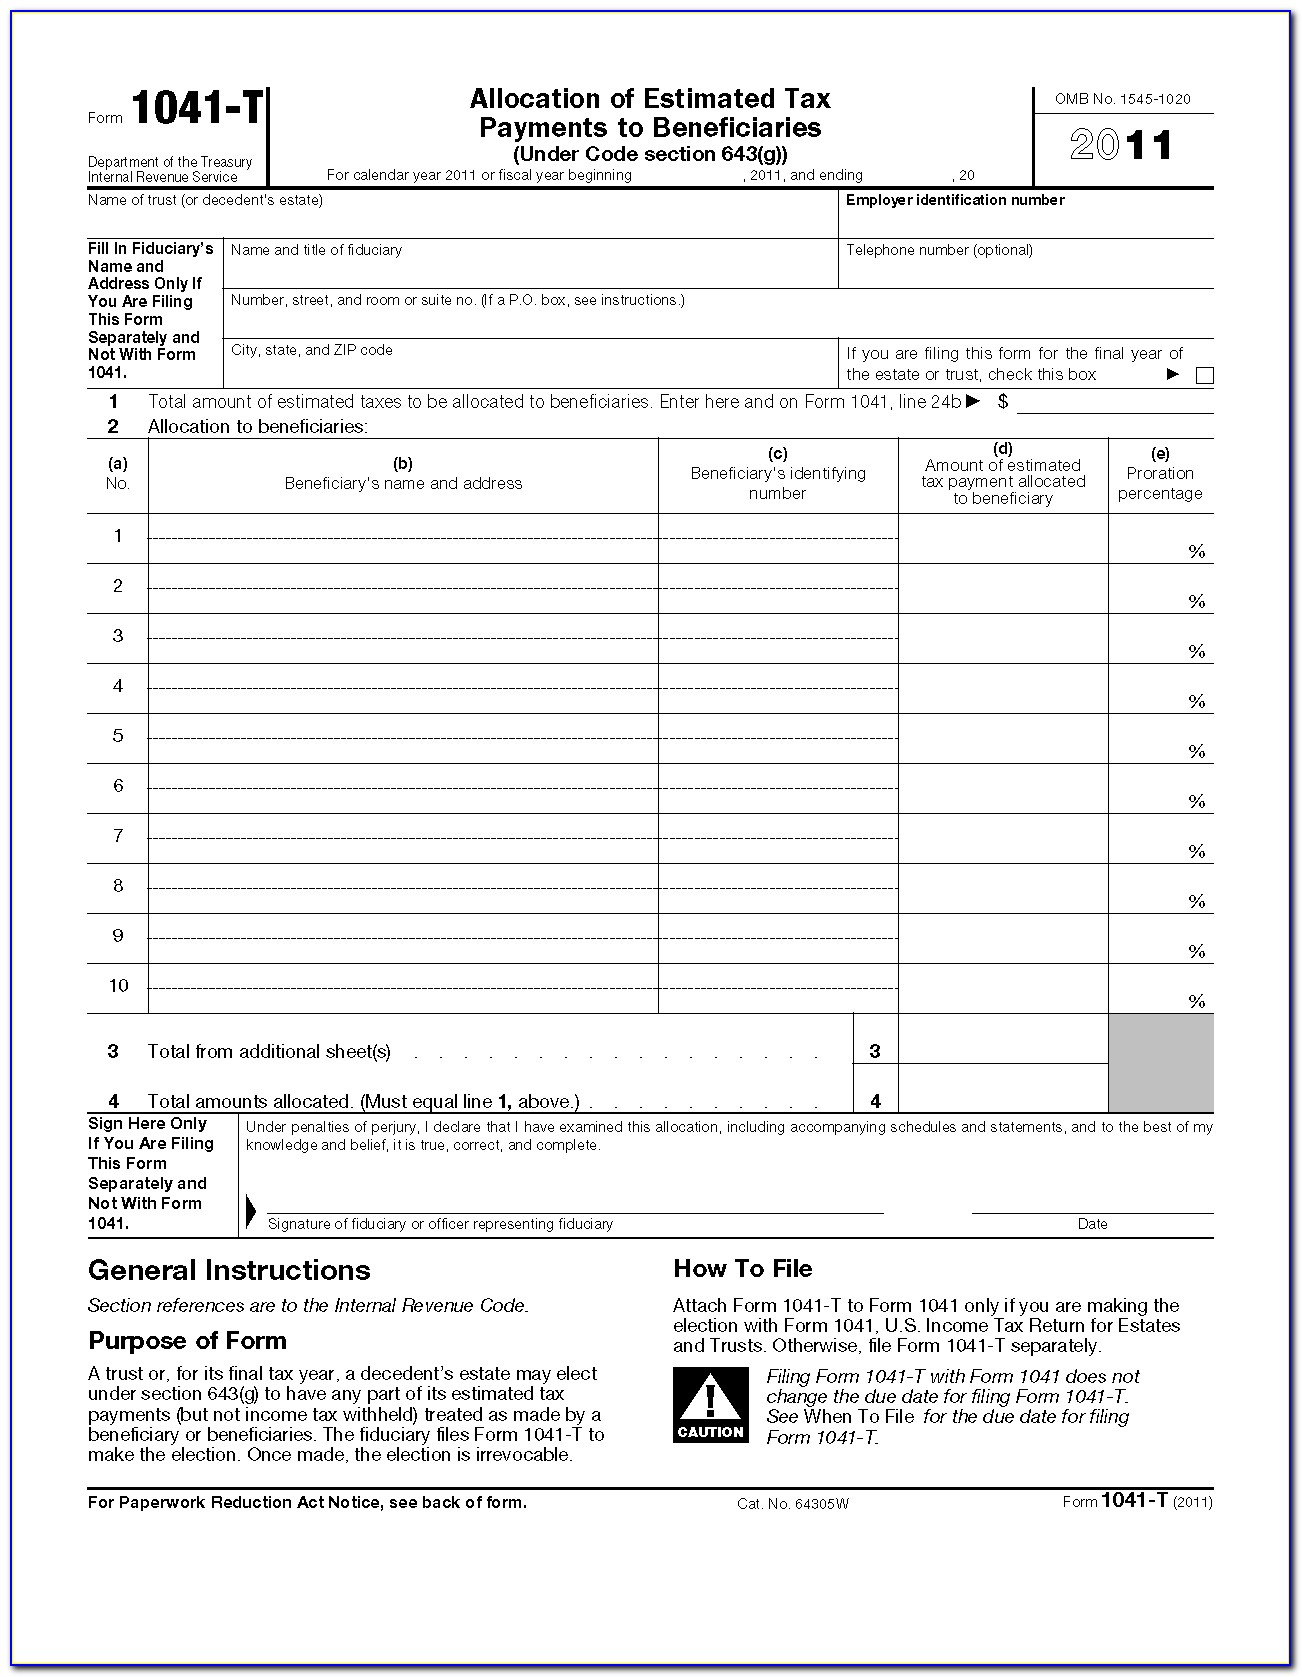 2011 Montana State Tax Forms